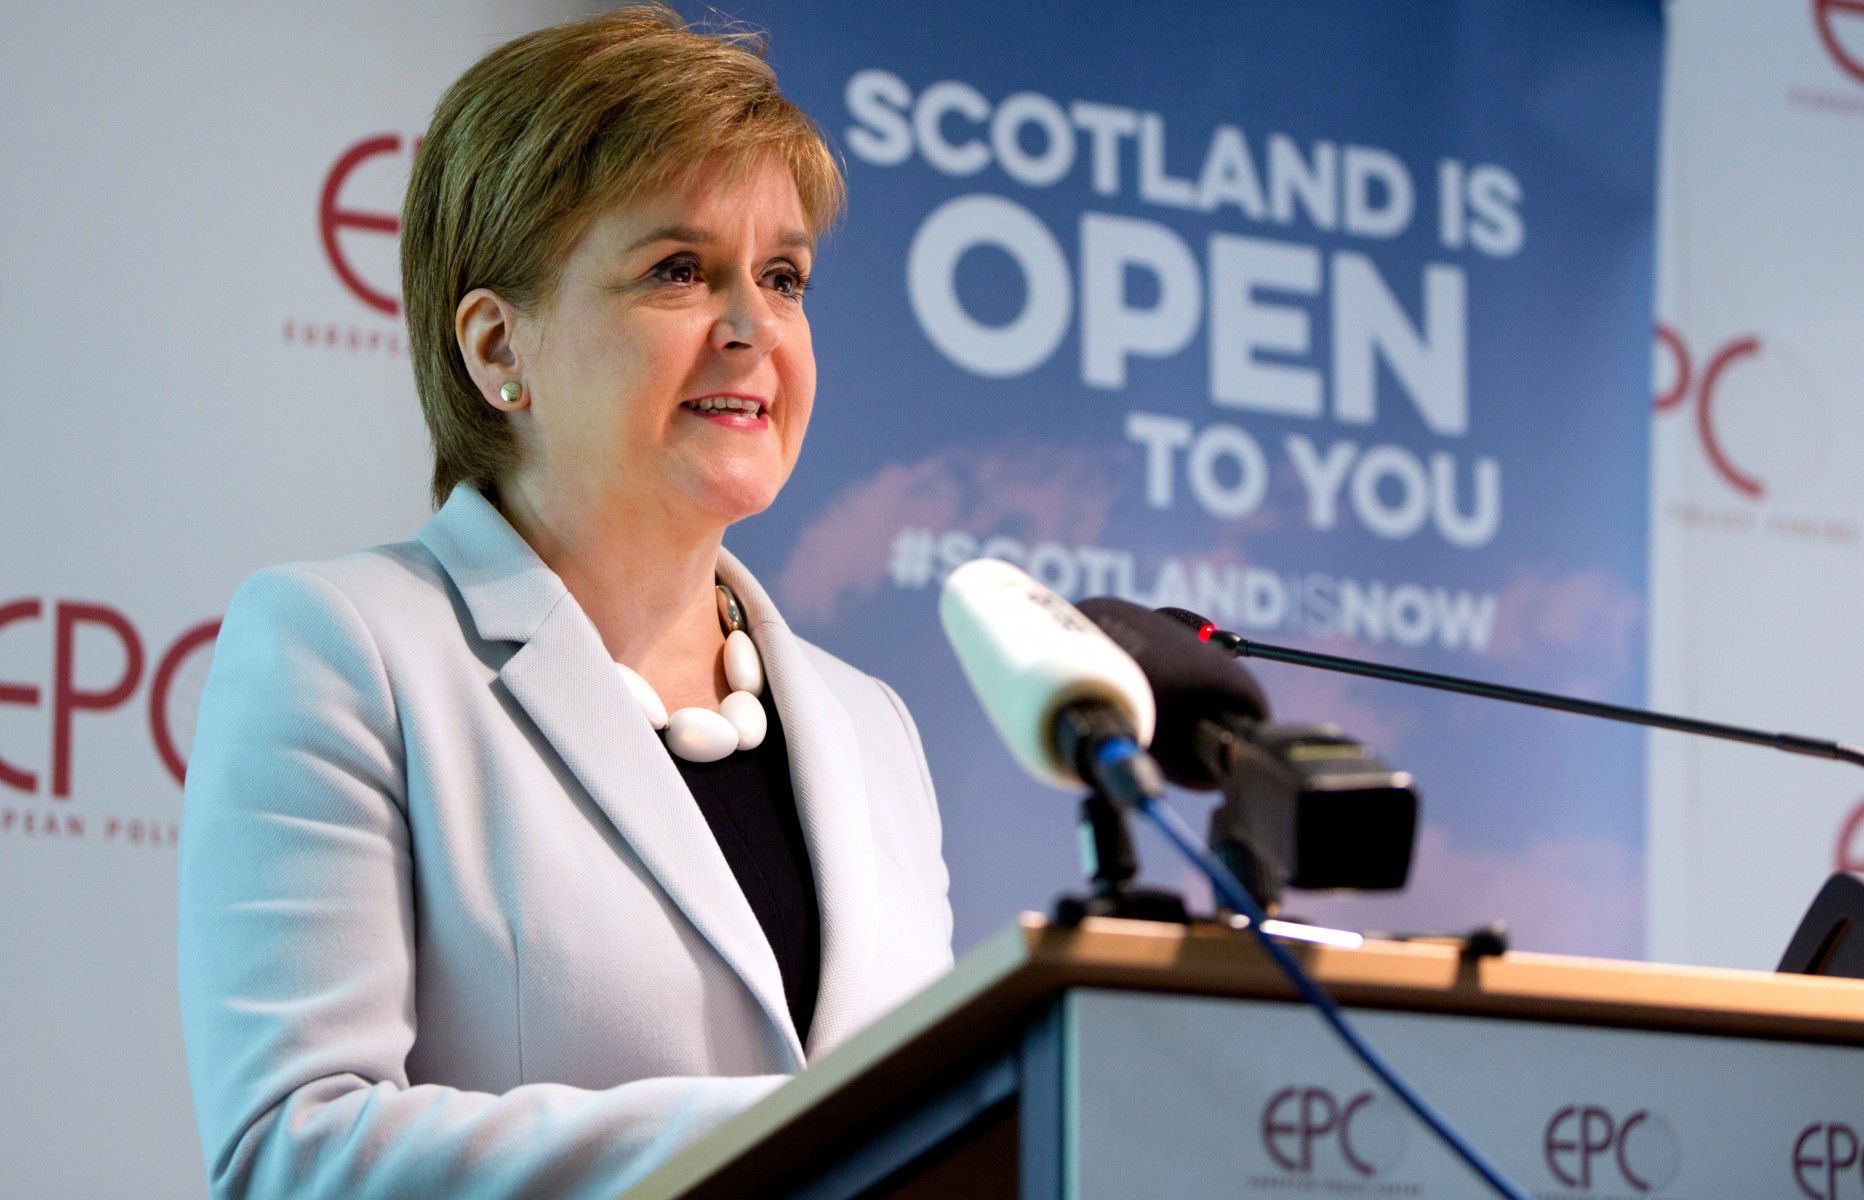 Nicola Sturgeon has made fresh calls for Scottish independence after winning 48 seats in the latest election